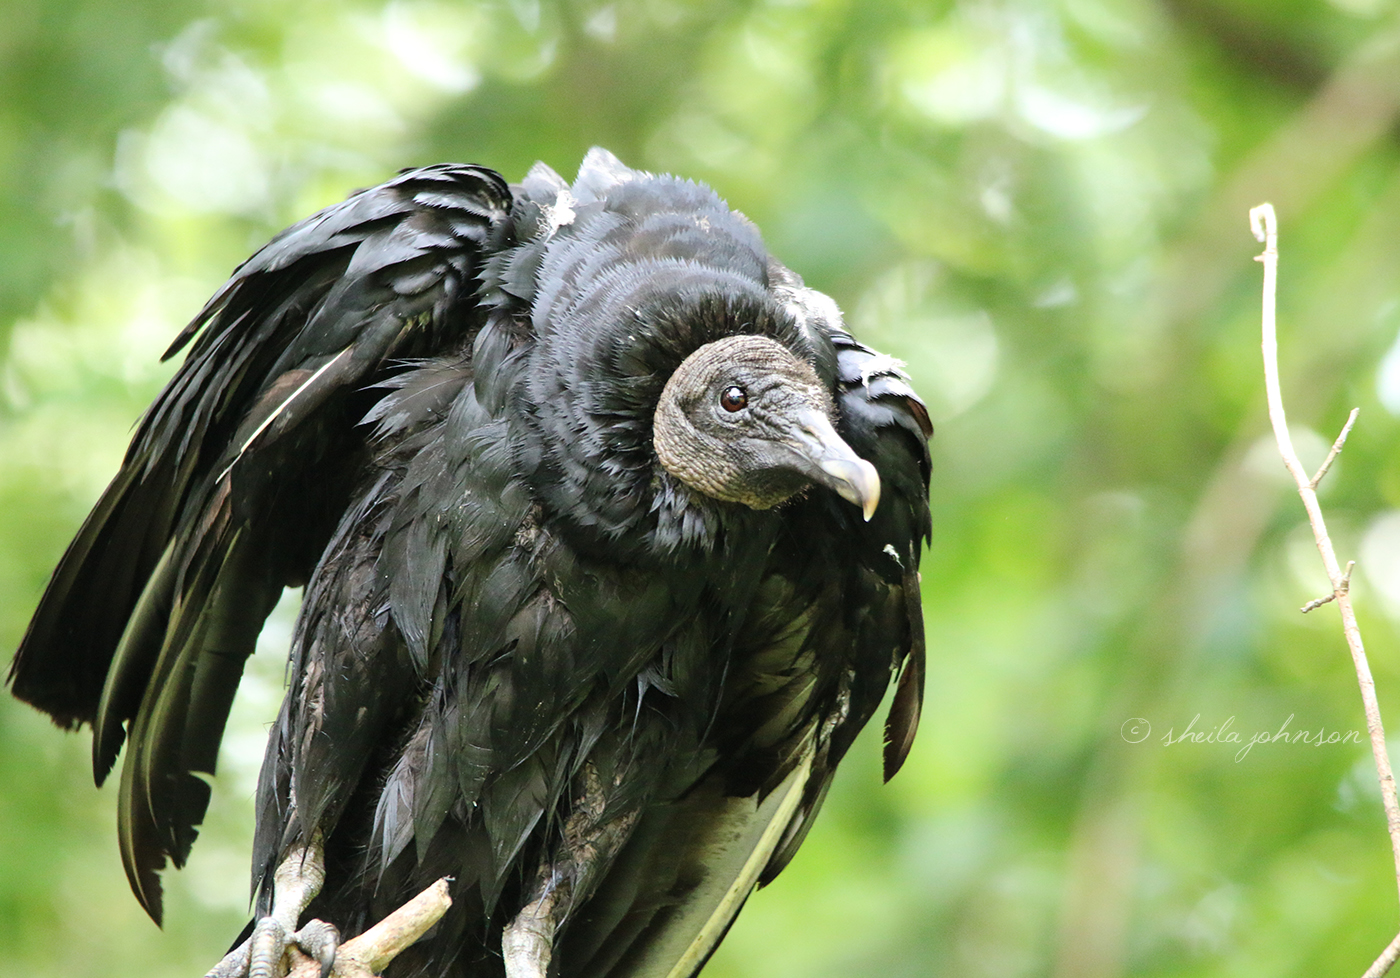 We're Not Sure What's Happening Here. Or, Rather, Why It's Happening. There Is A Decided Lean In This Black Vulture, Though He Seems None Worse For The Wear.